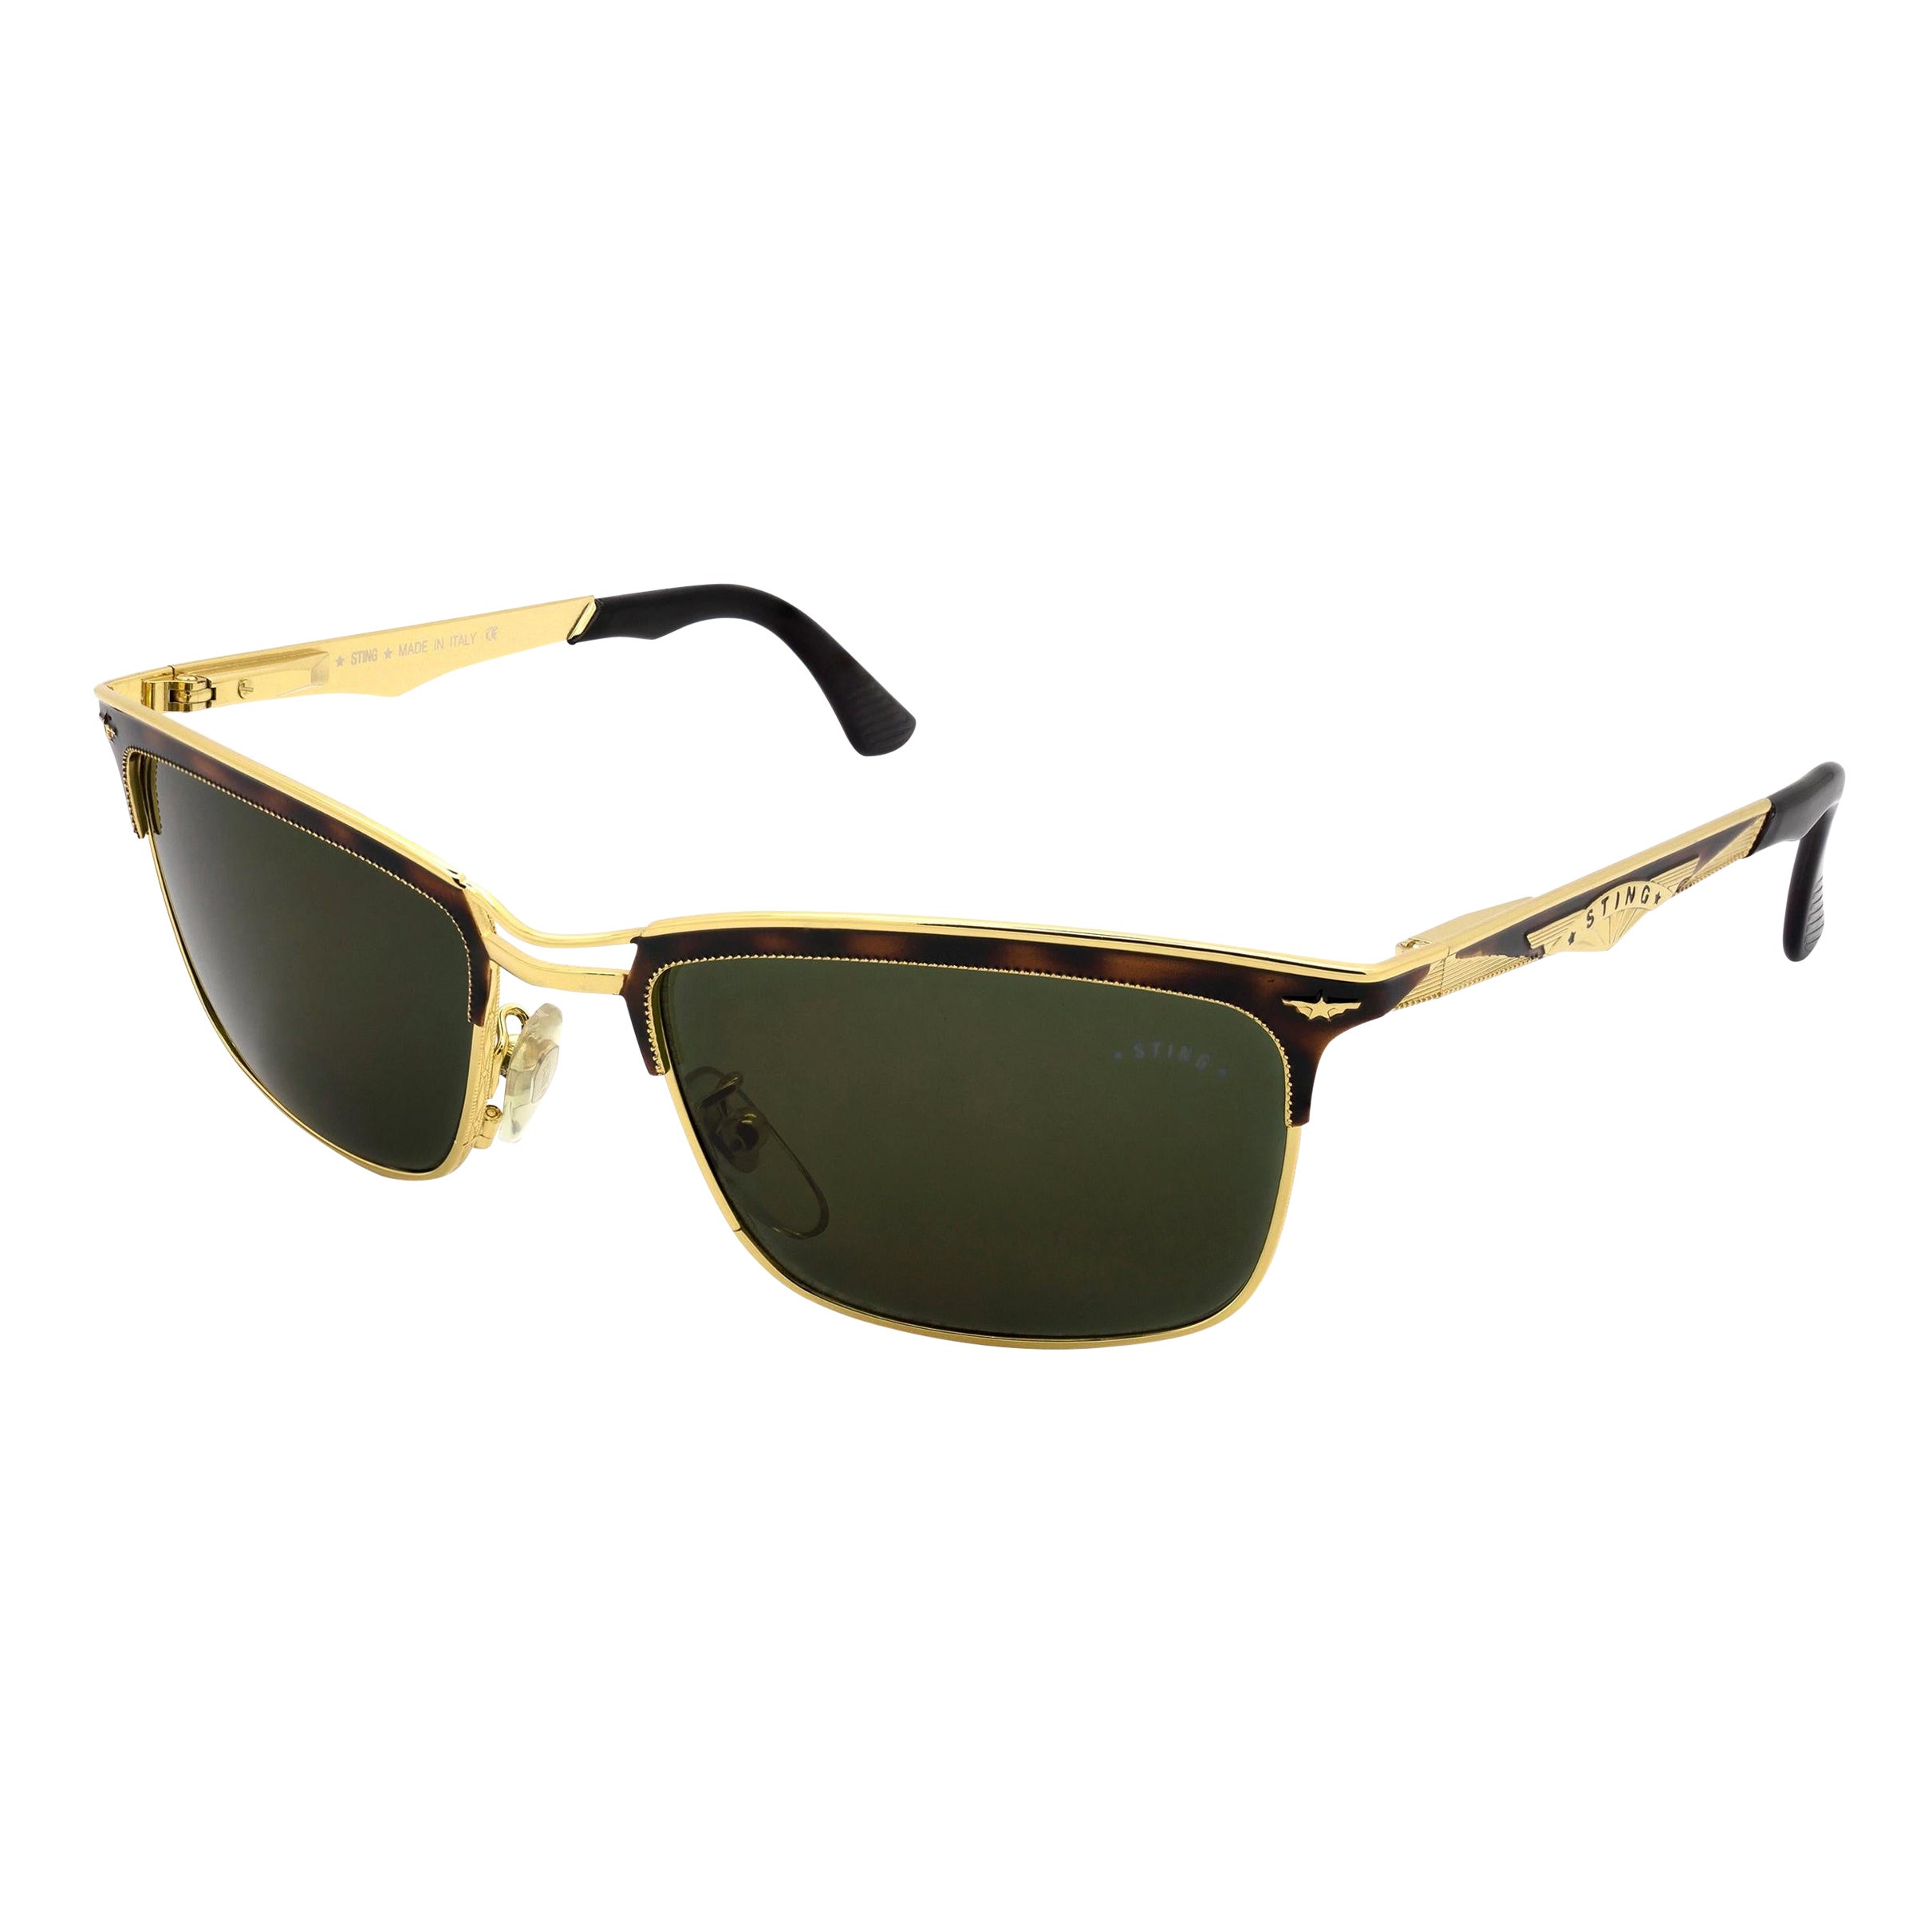 Sting gold vintage sunglasses, Italy 80s For Sale